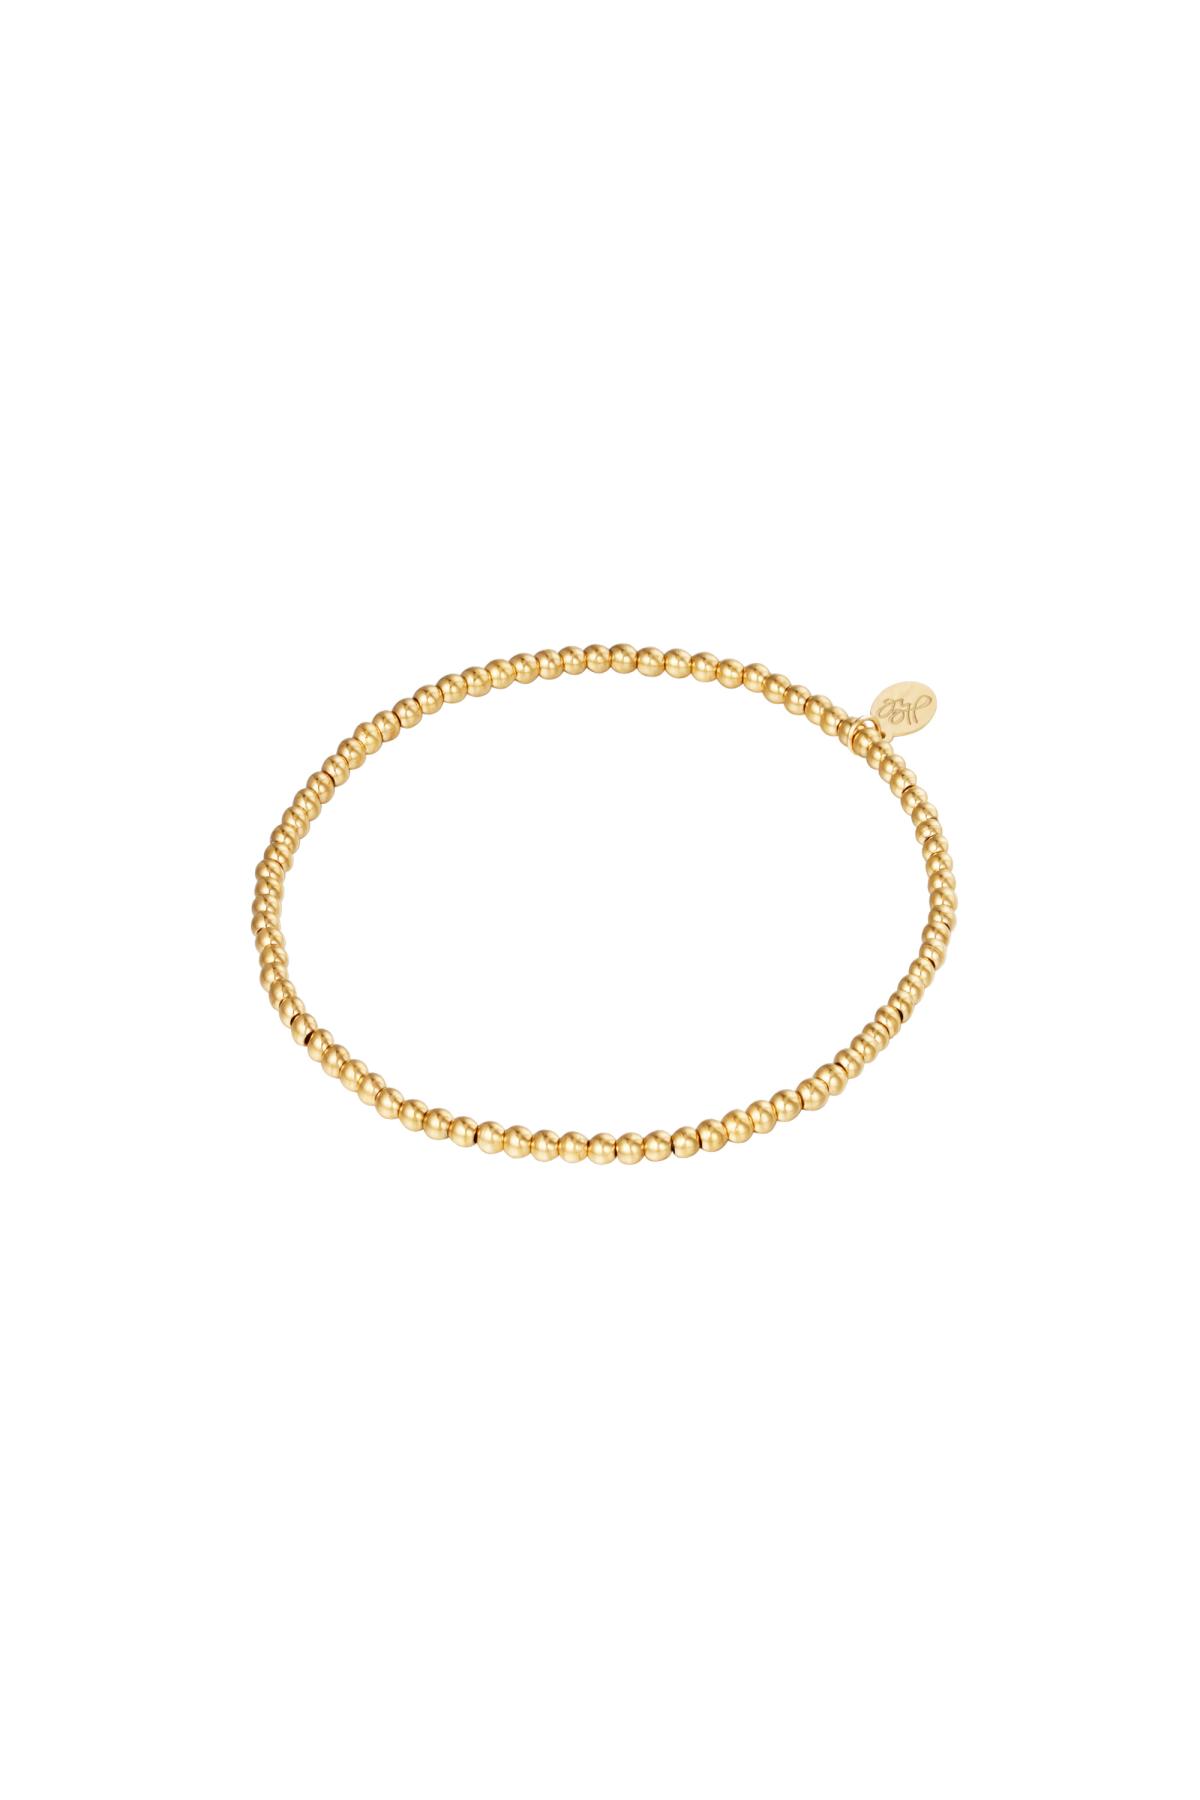 Gold / Bracelet Small Beads Gold Stainless Steel-2.5MM Picture2